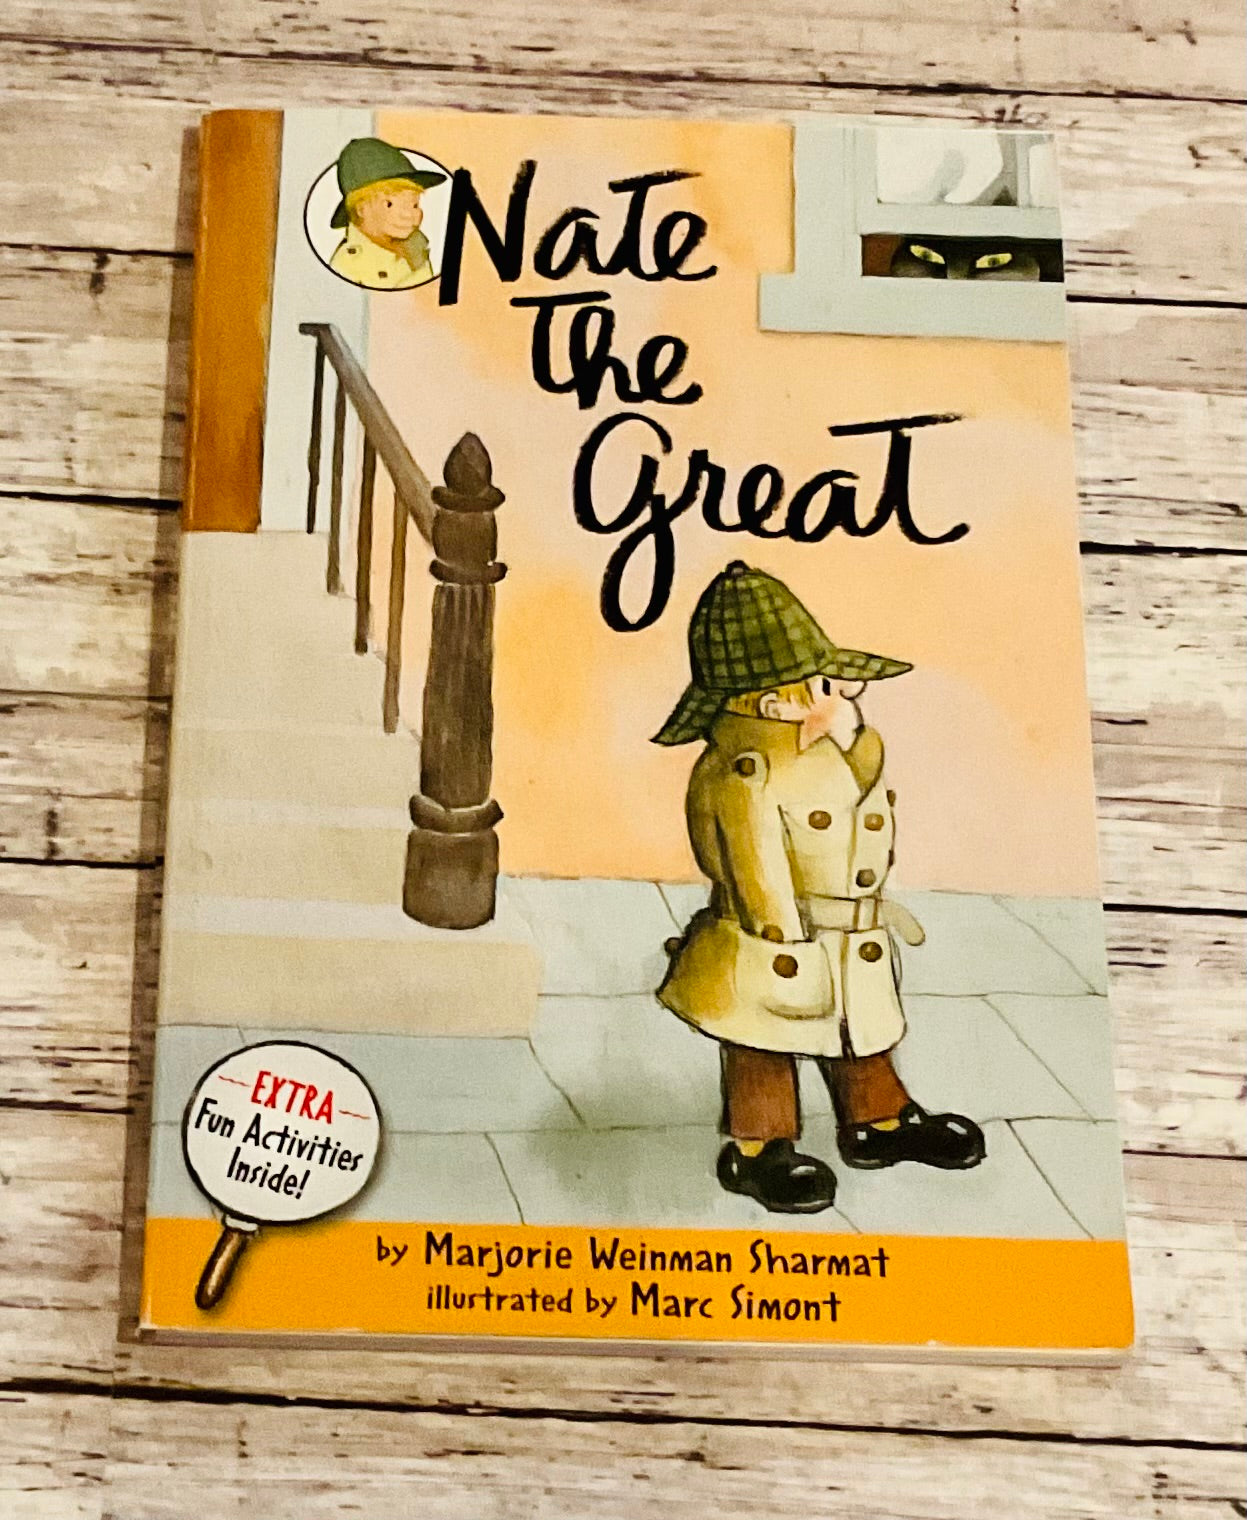 Nate the Great - Anchored Homeschool Resource Center